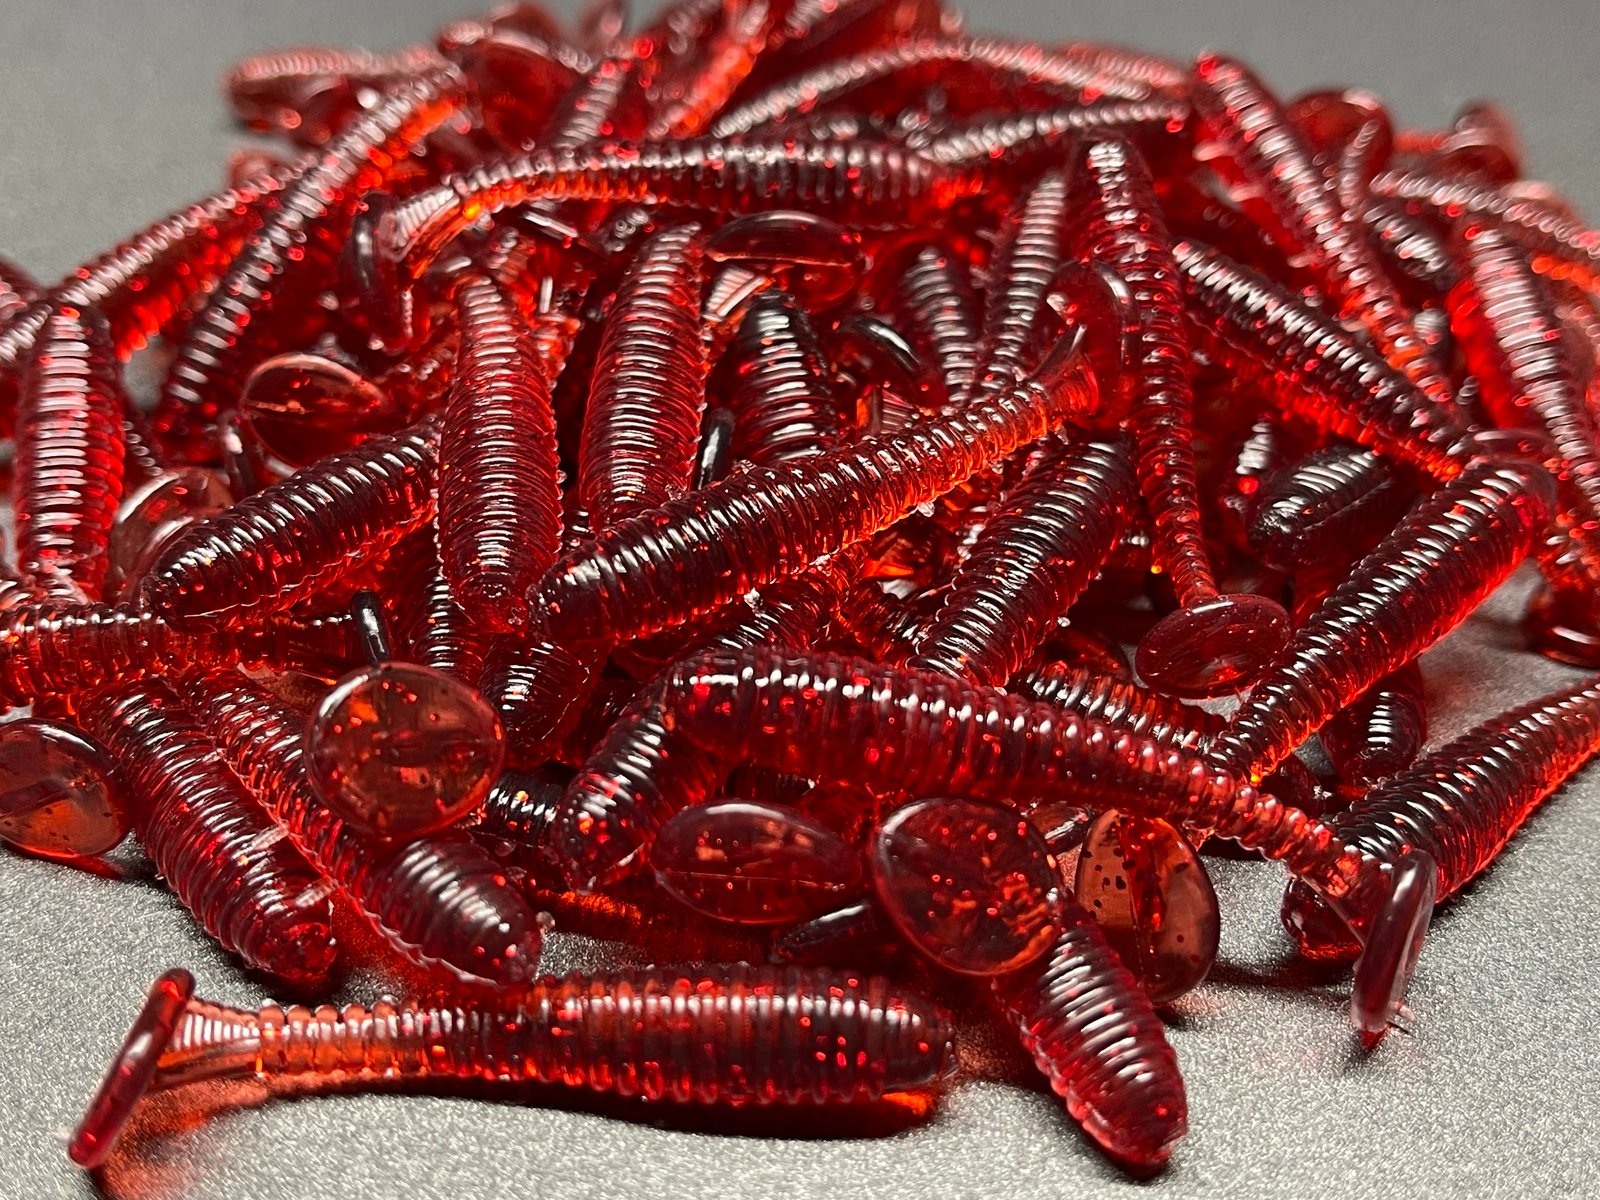 https://assets.bigcartel.com/product_images/c08e1912-f15d-40d7-bd8f-27798ddde294/1-75-paddle-tail-super-red-motor-oil-swimbaits.jpg?auto=format&...